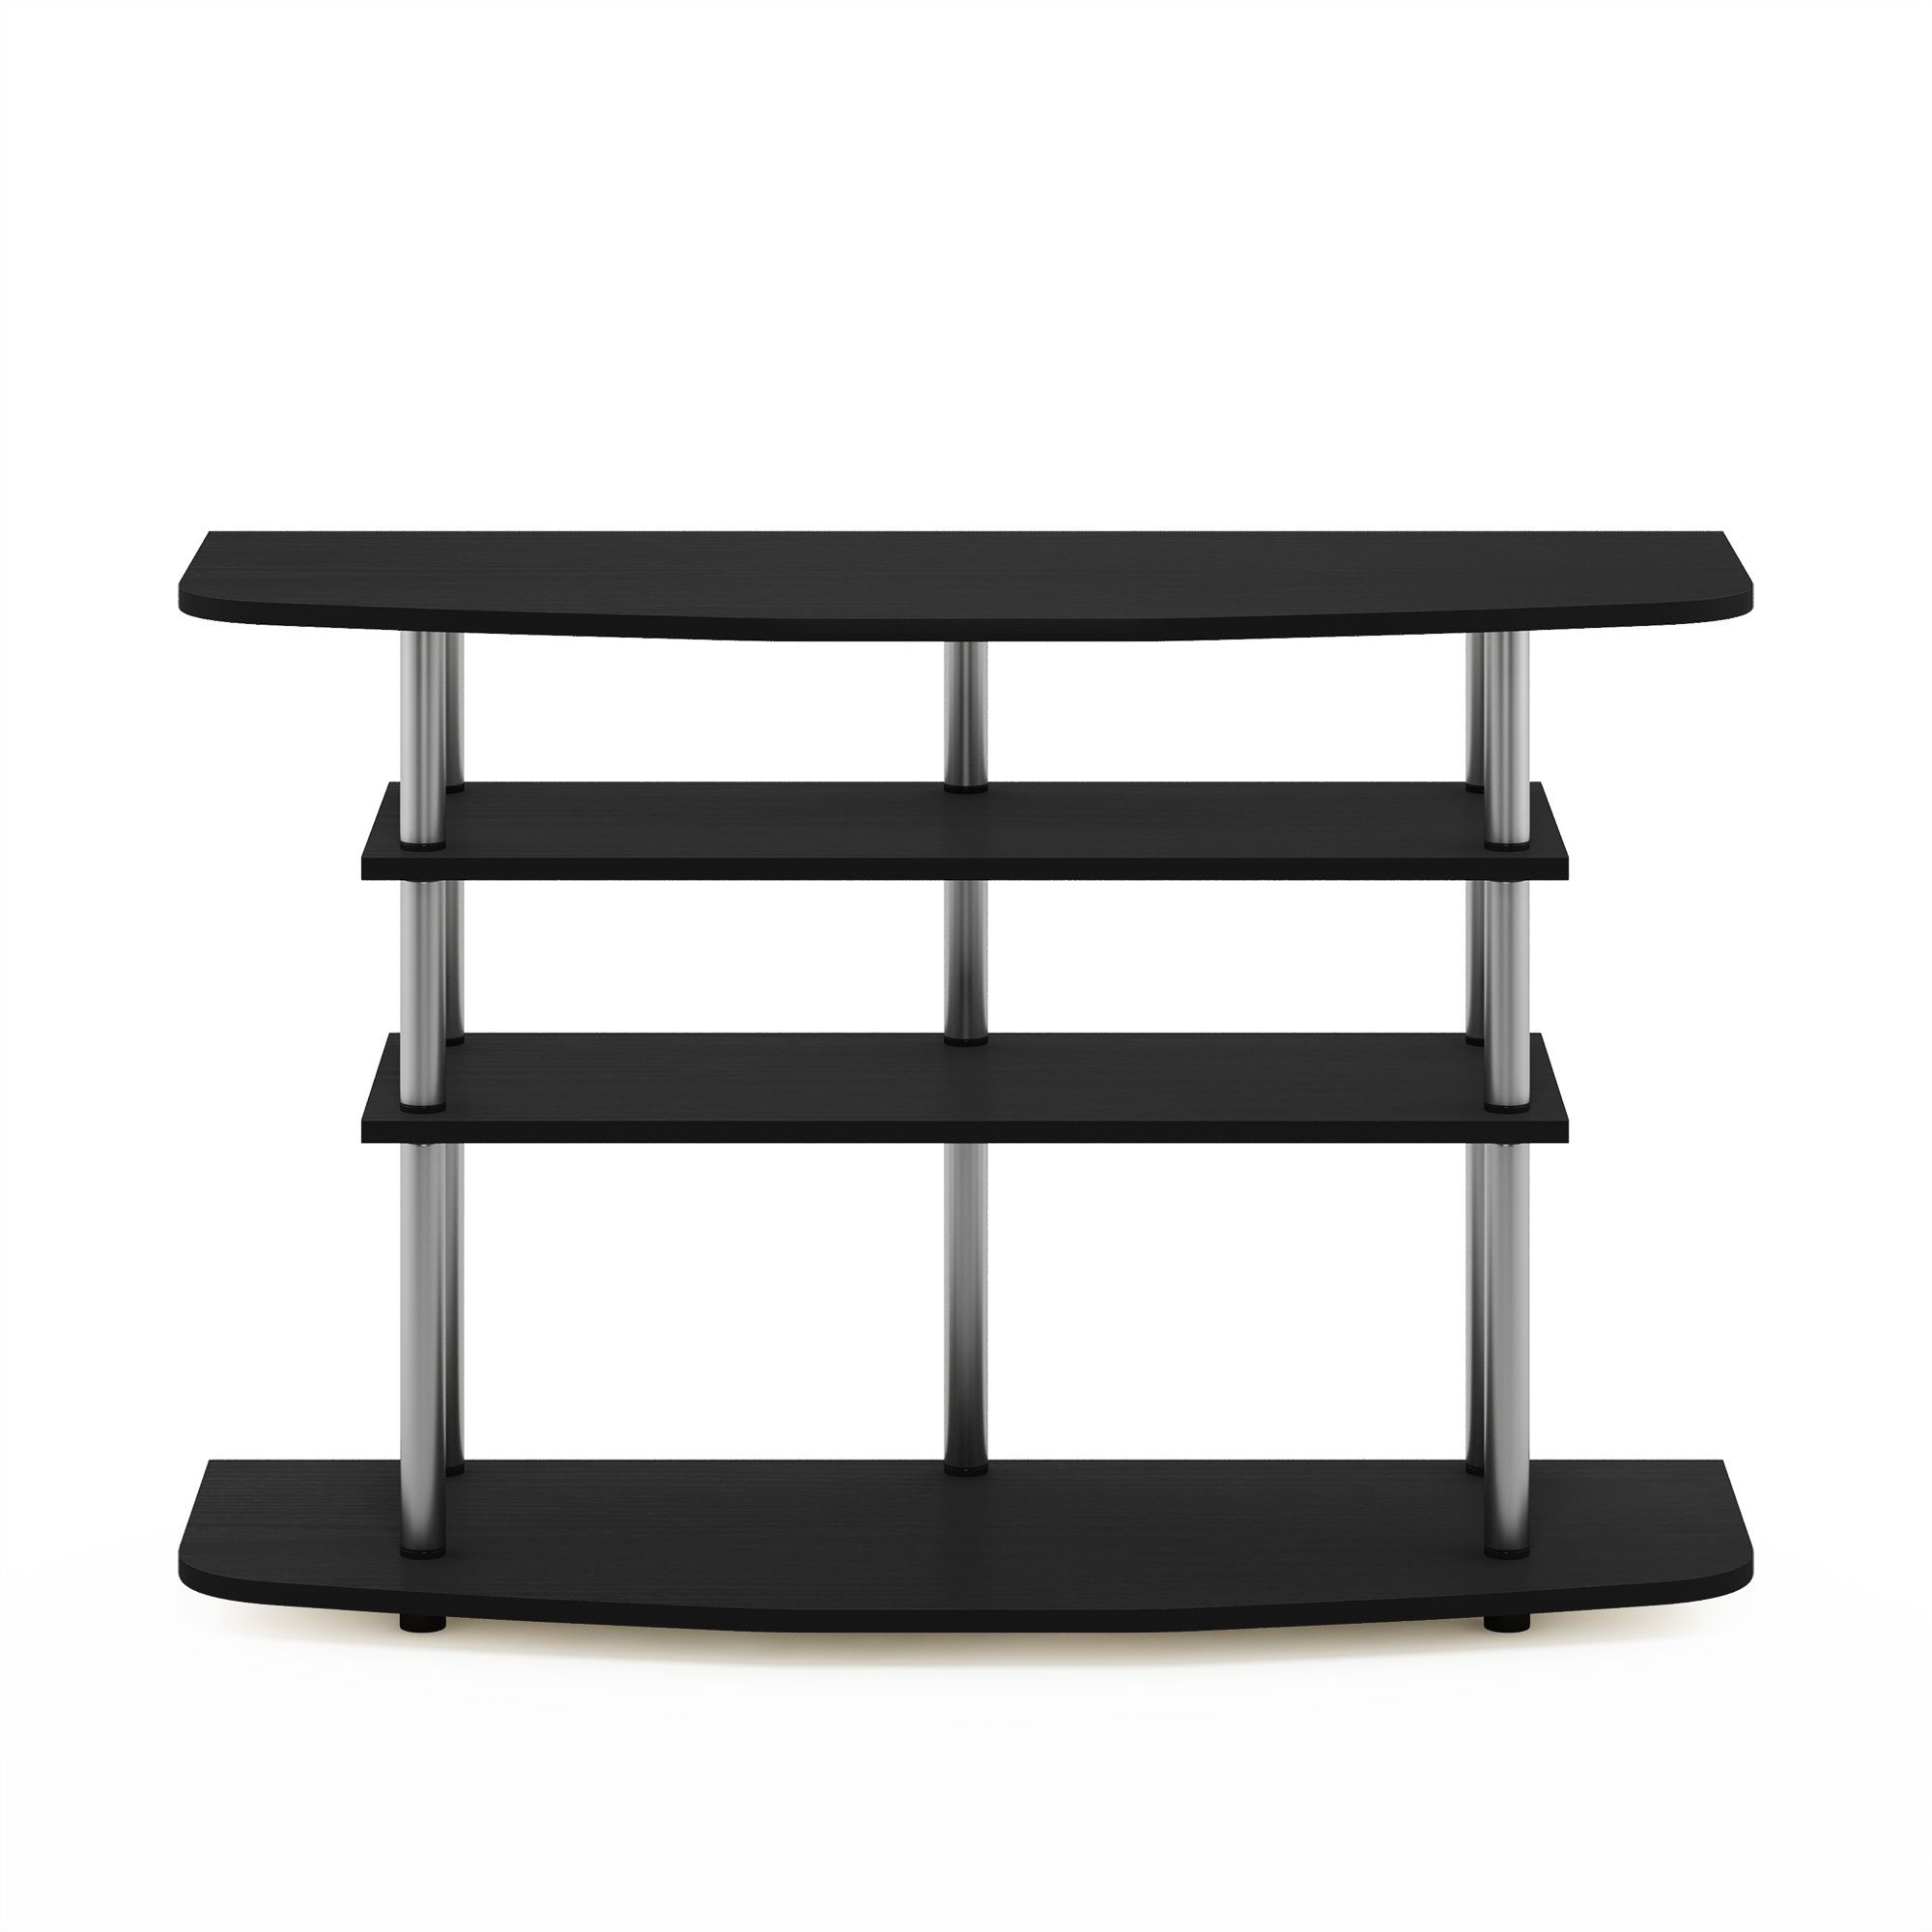 Recent Furinno Jaya Large Tv Stands With Storage Bin In Furinno Frans Turn N Tube 4 Tier Tv Stand For Tv Up To  (View 8 of 10)